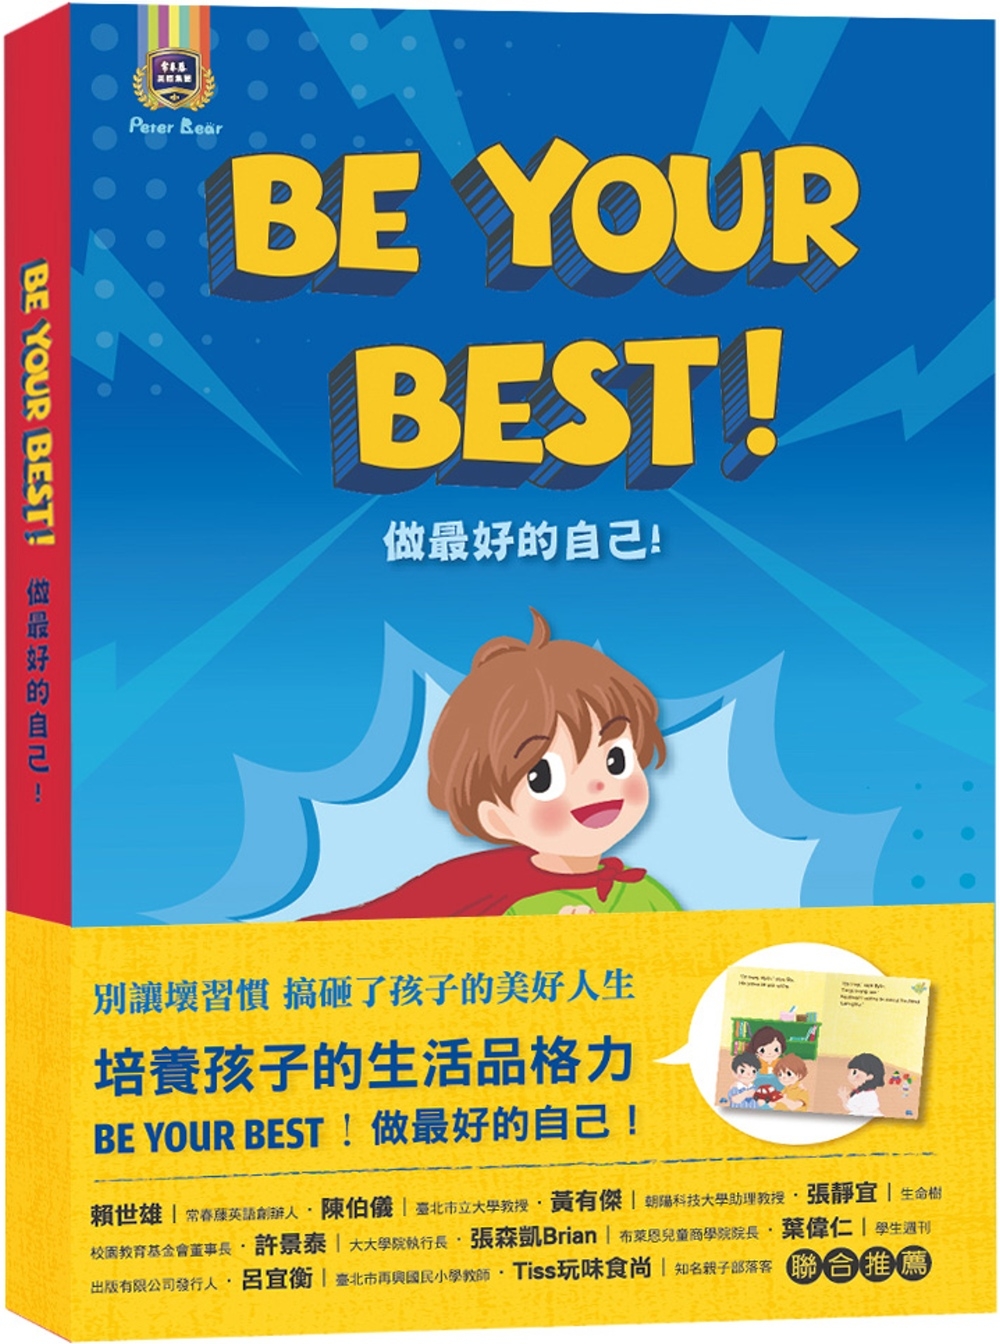 Be Your Best! 做最好的自己！